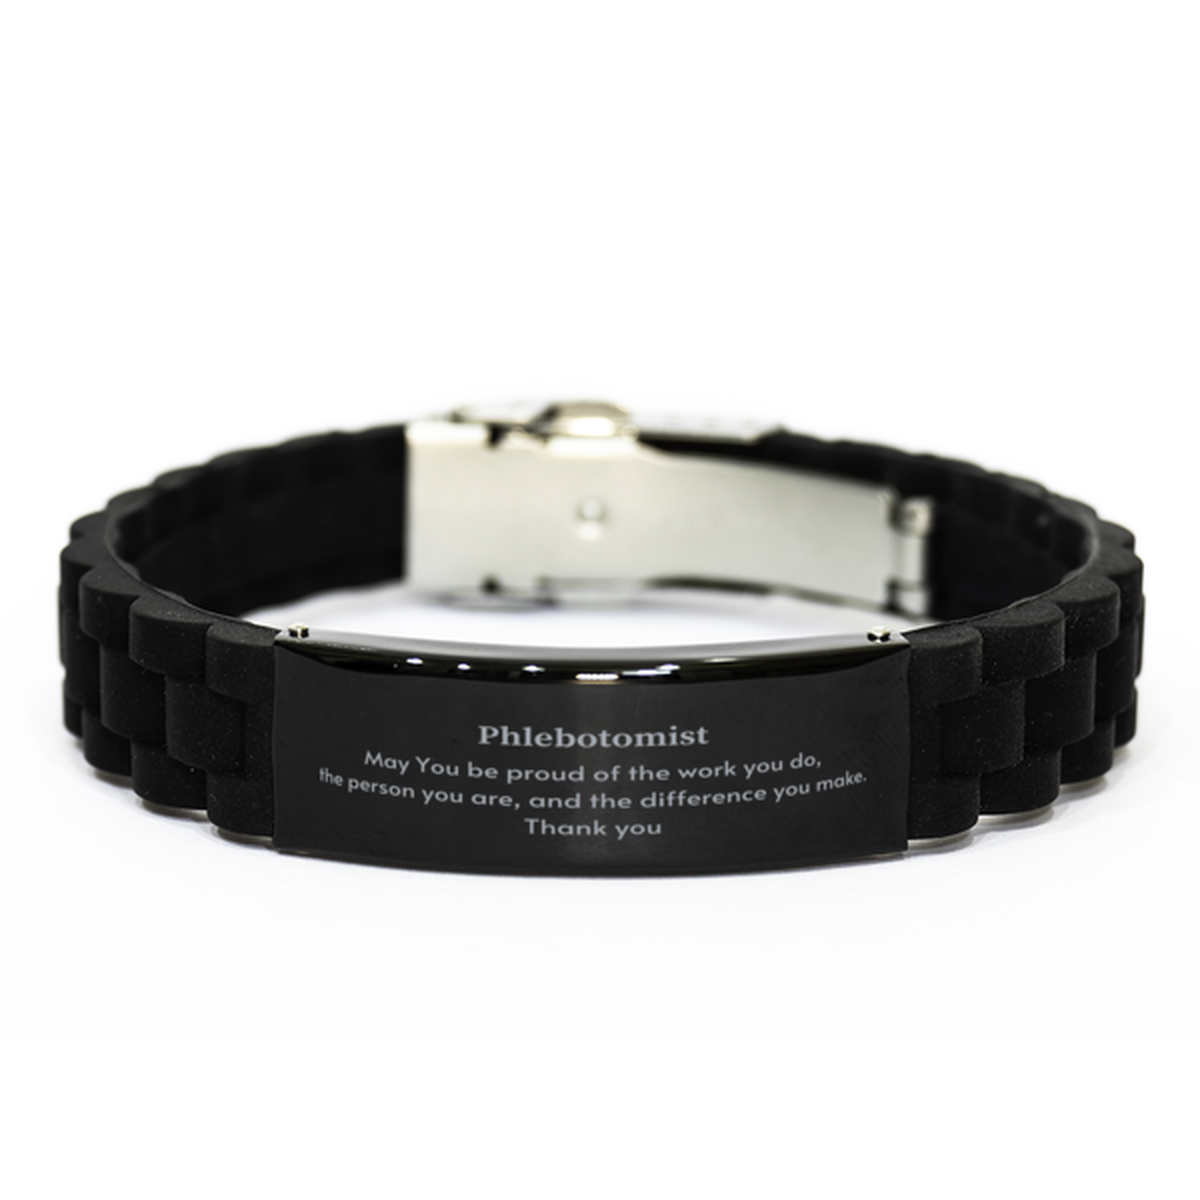 Heartwarming Black Glidelock Clasp Bracelet Retirement Coworkers Gifts for Phlebotomist, Phlebotomist May You be proud of the work you do, the person you are Gifts for Boss Men Women Friends